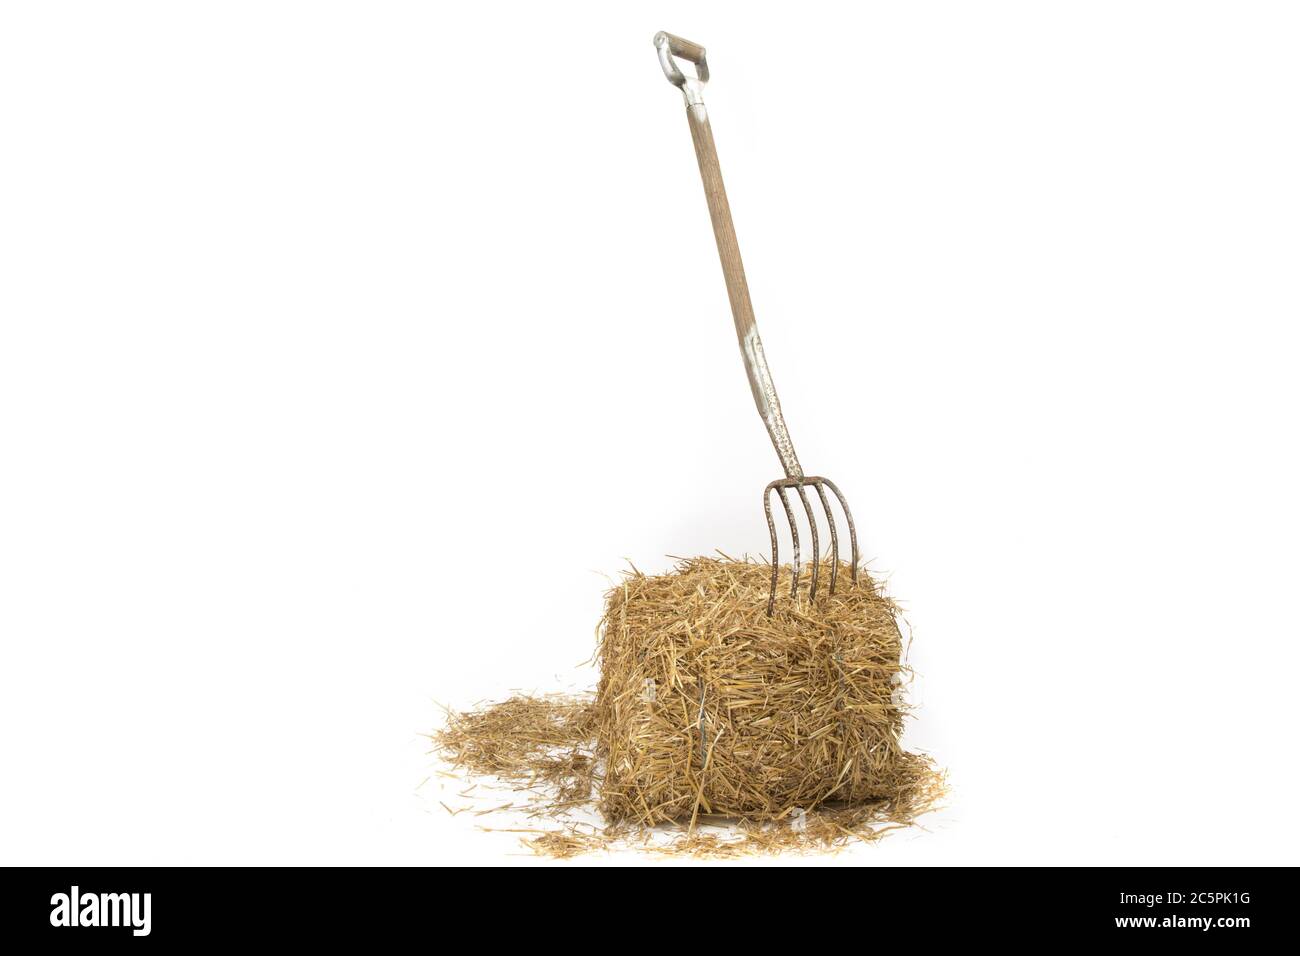 a pitch fork stuck into a bale of straw Stock Photo